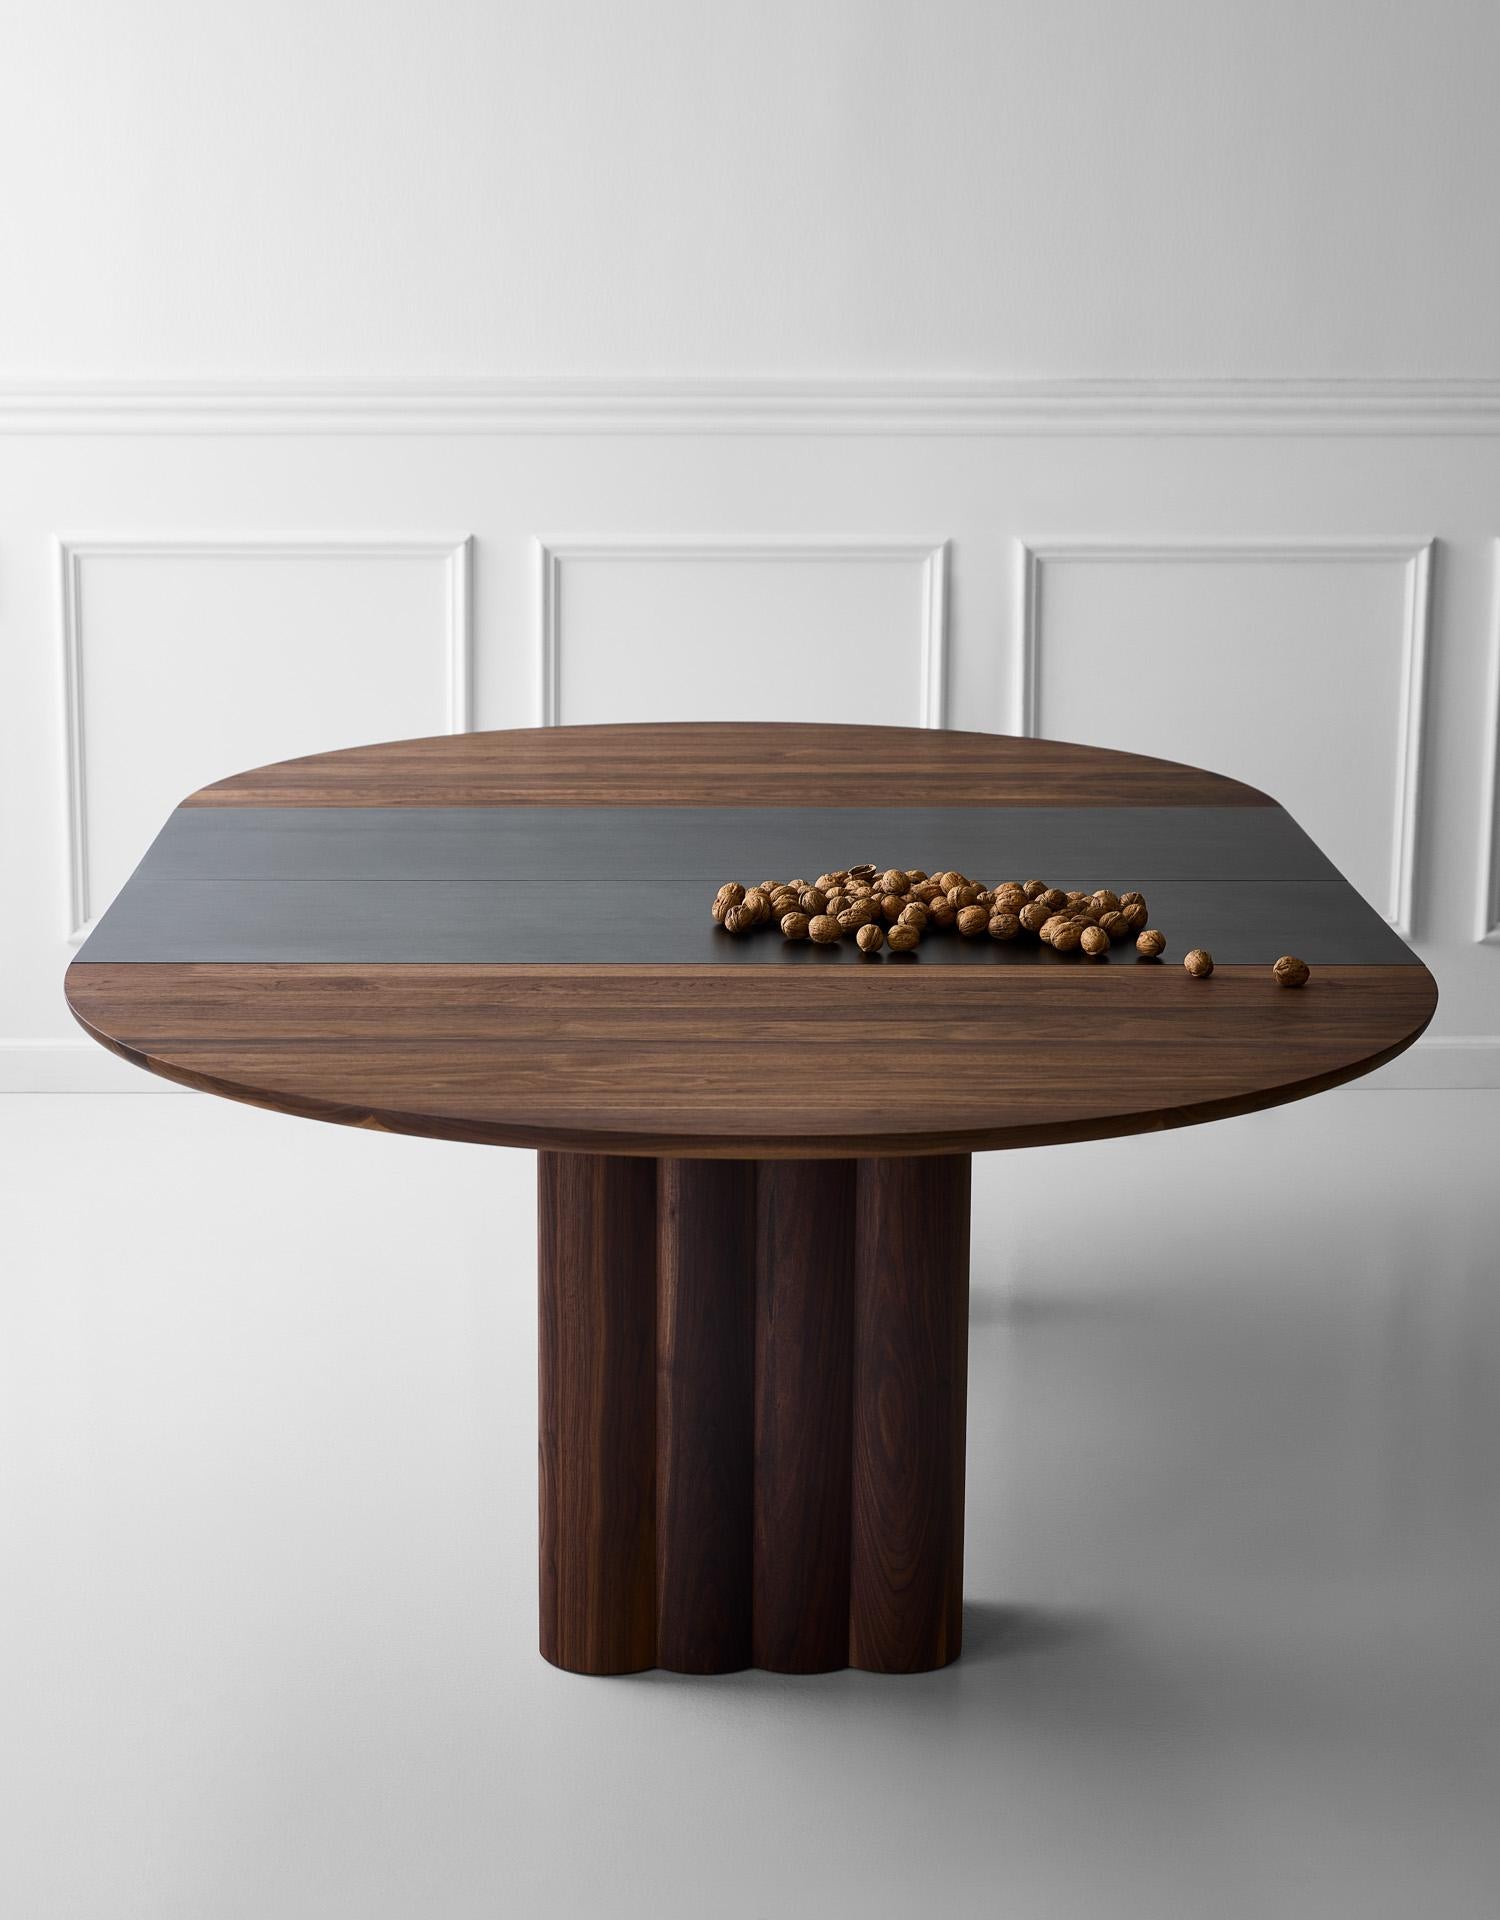 Scandinavian Modern Round Dining Table 'Plush' by Dk3, Smoked Oak or Walnut, 140 cm For Sale